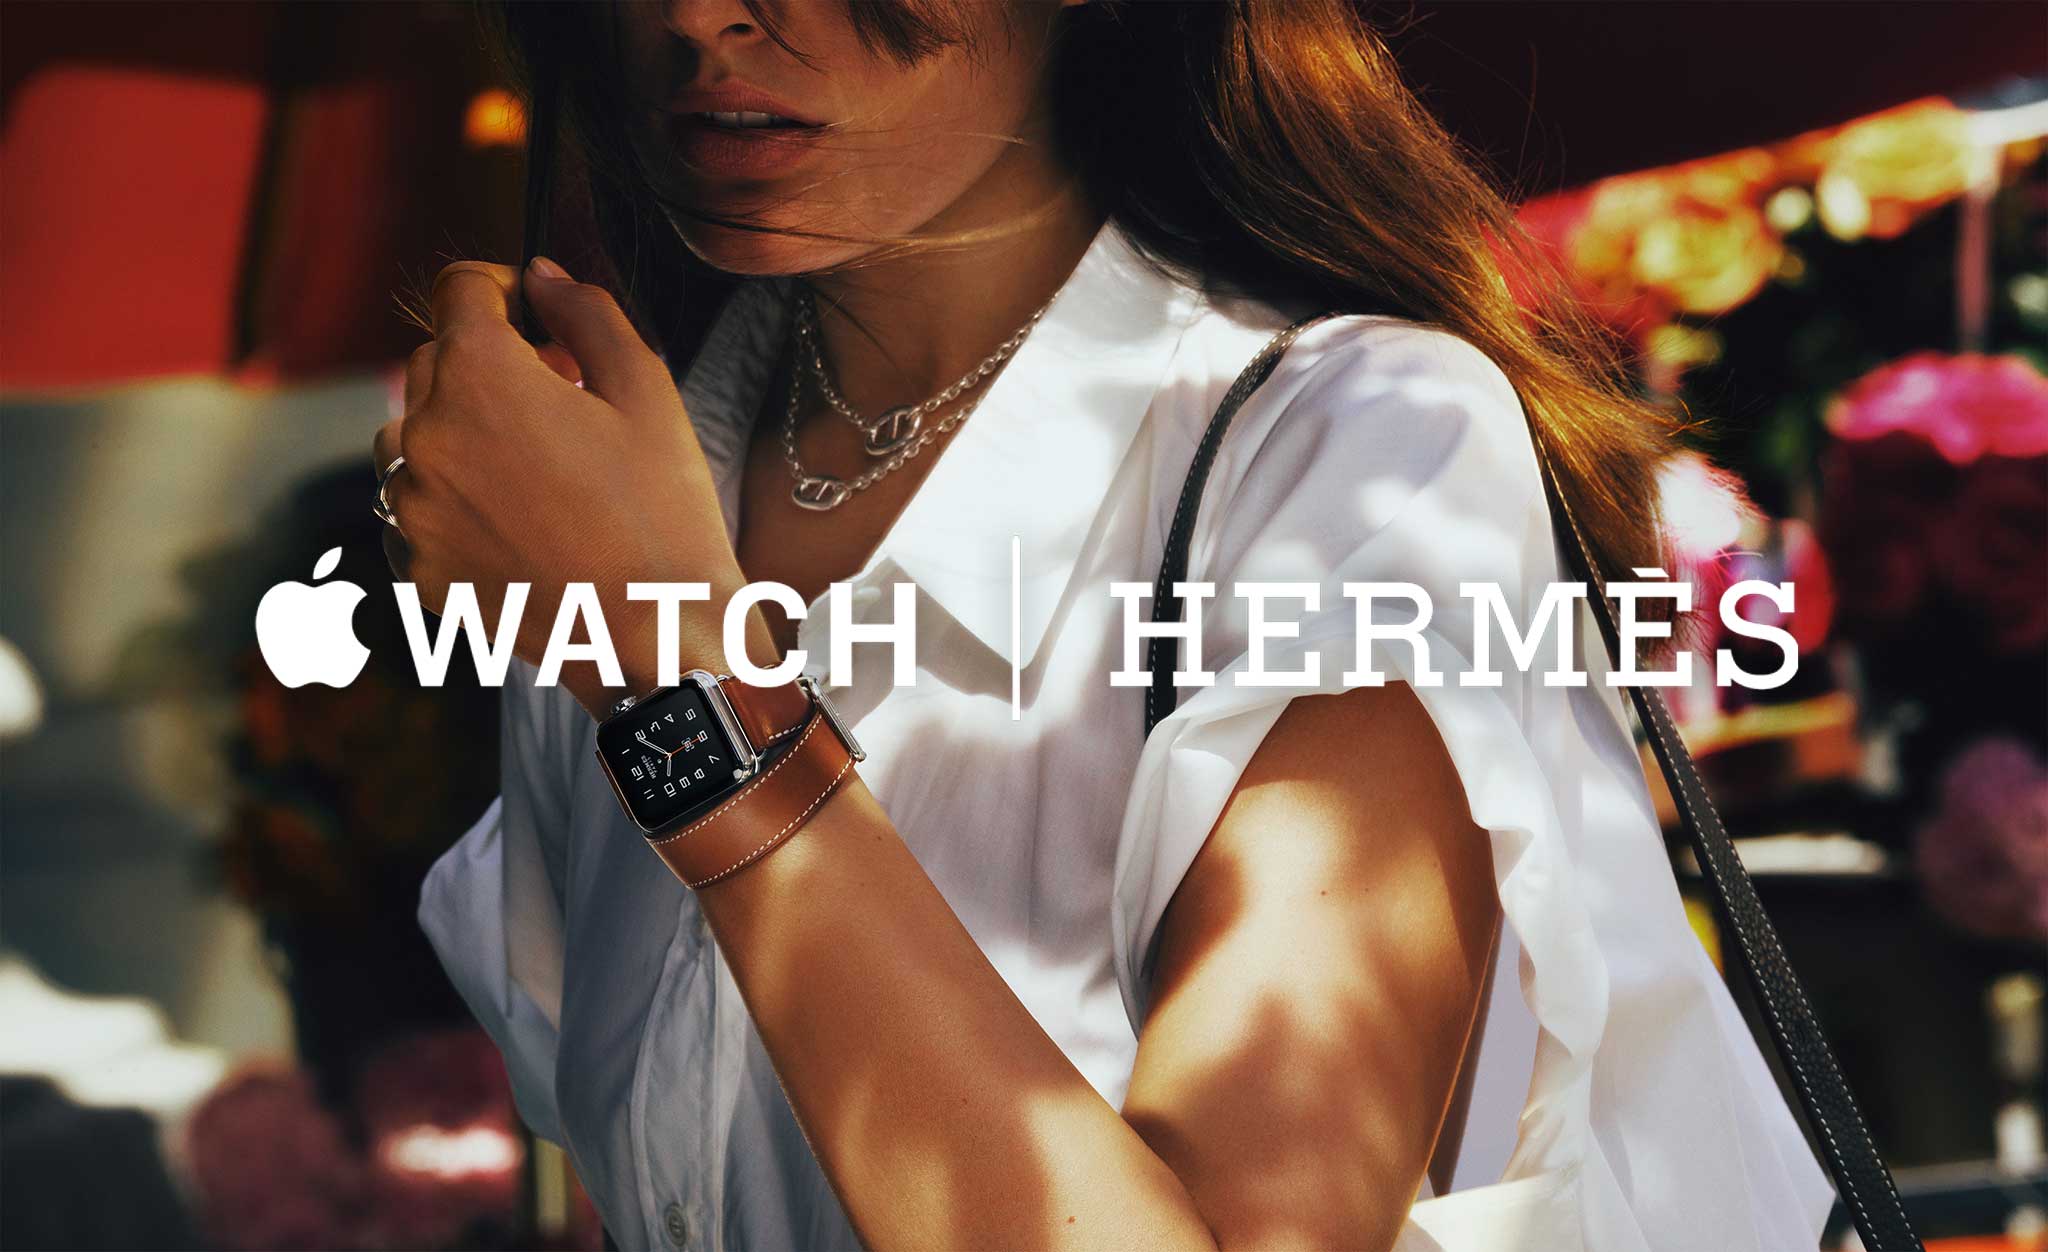 apple-watch-and-hermes-courtesy-apple-inc